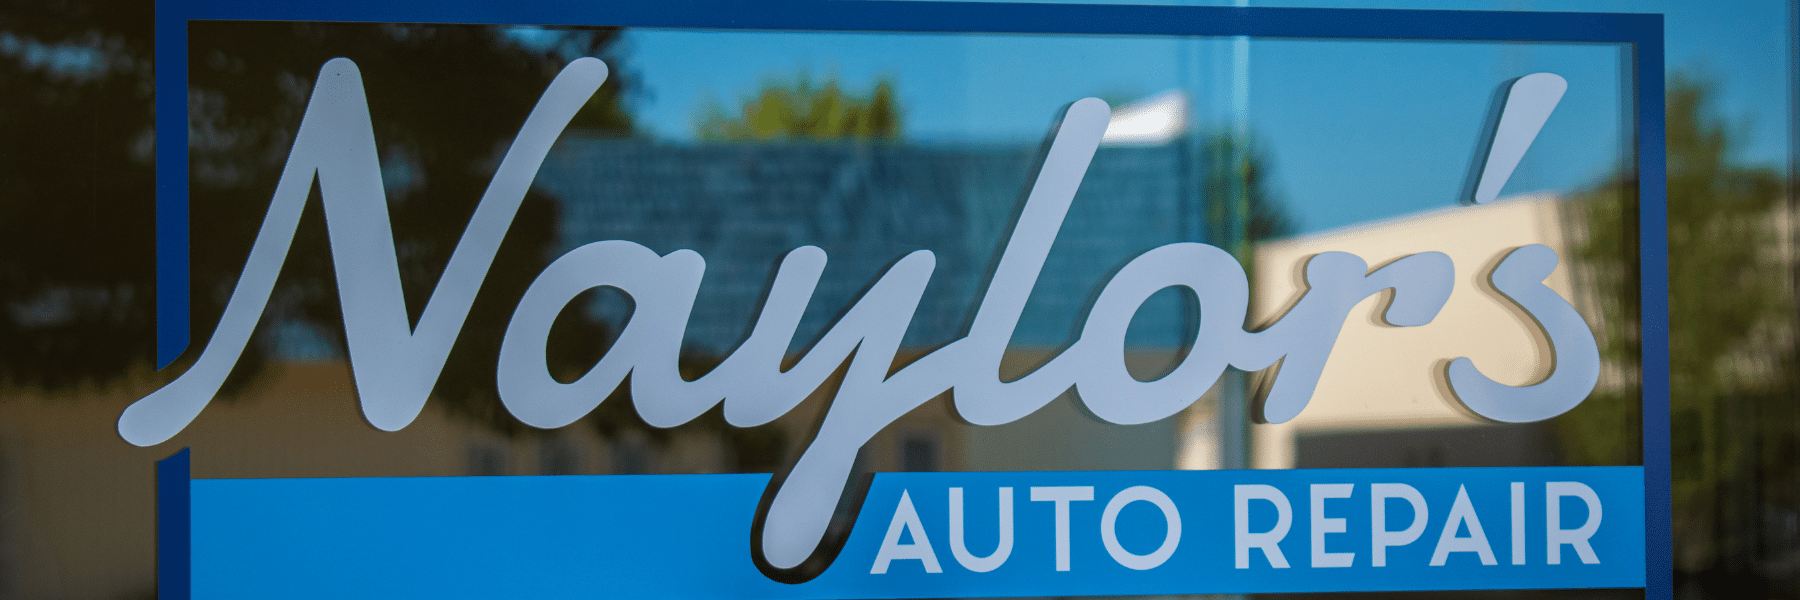 naylor's auto repair window signage